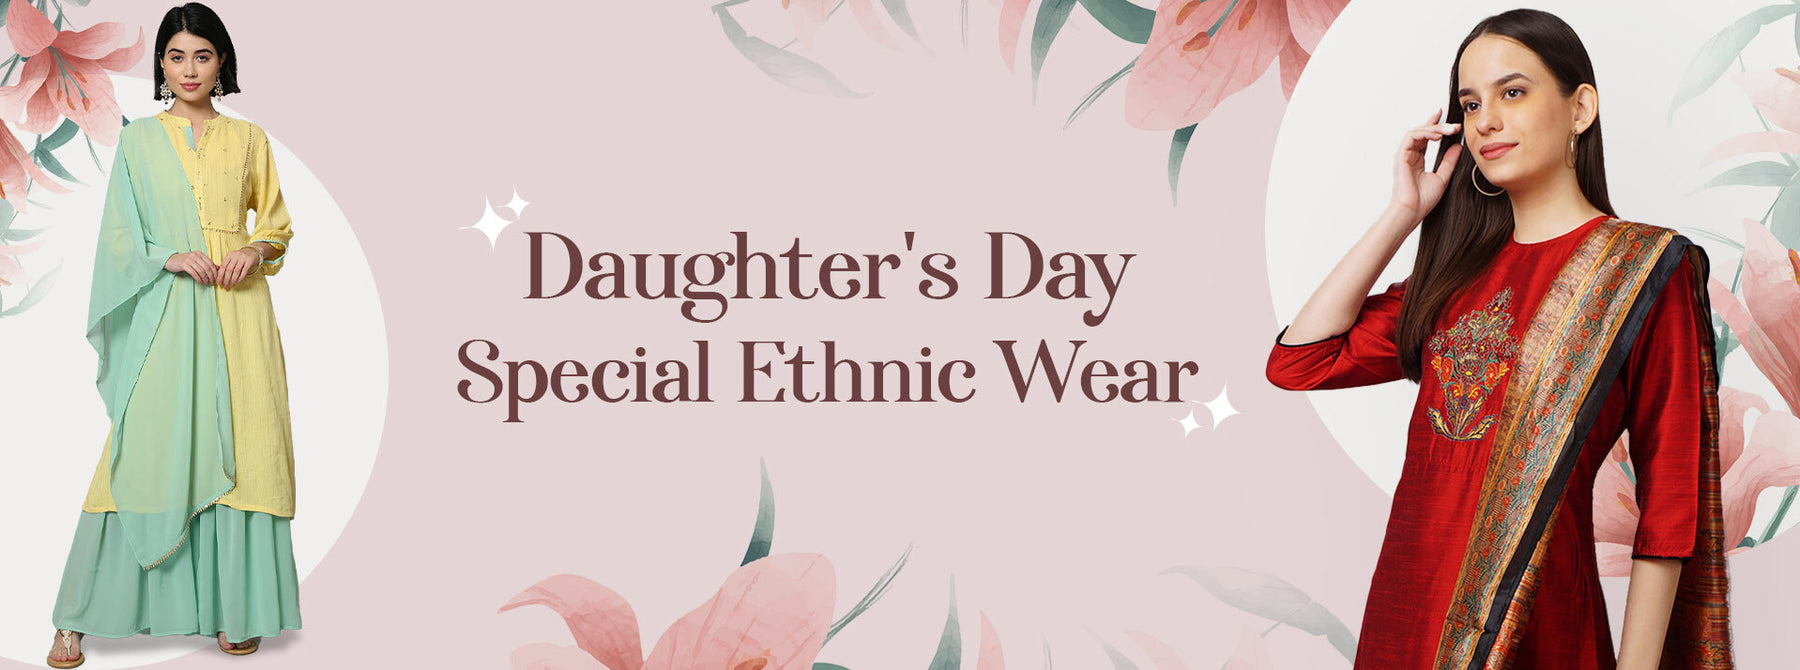 Make Daughter’s Day Special by Gifting Her these Ethnic Outfits